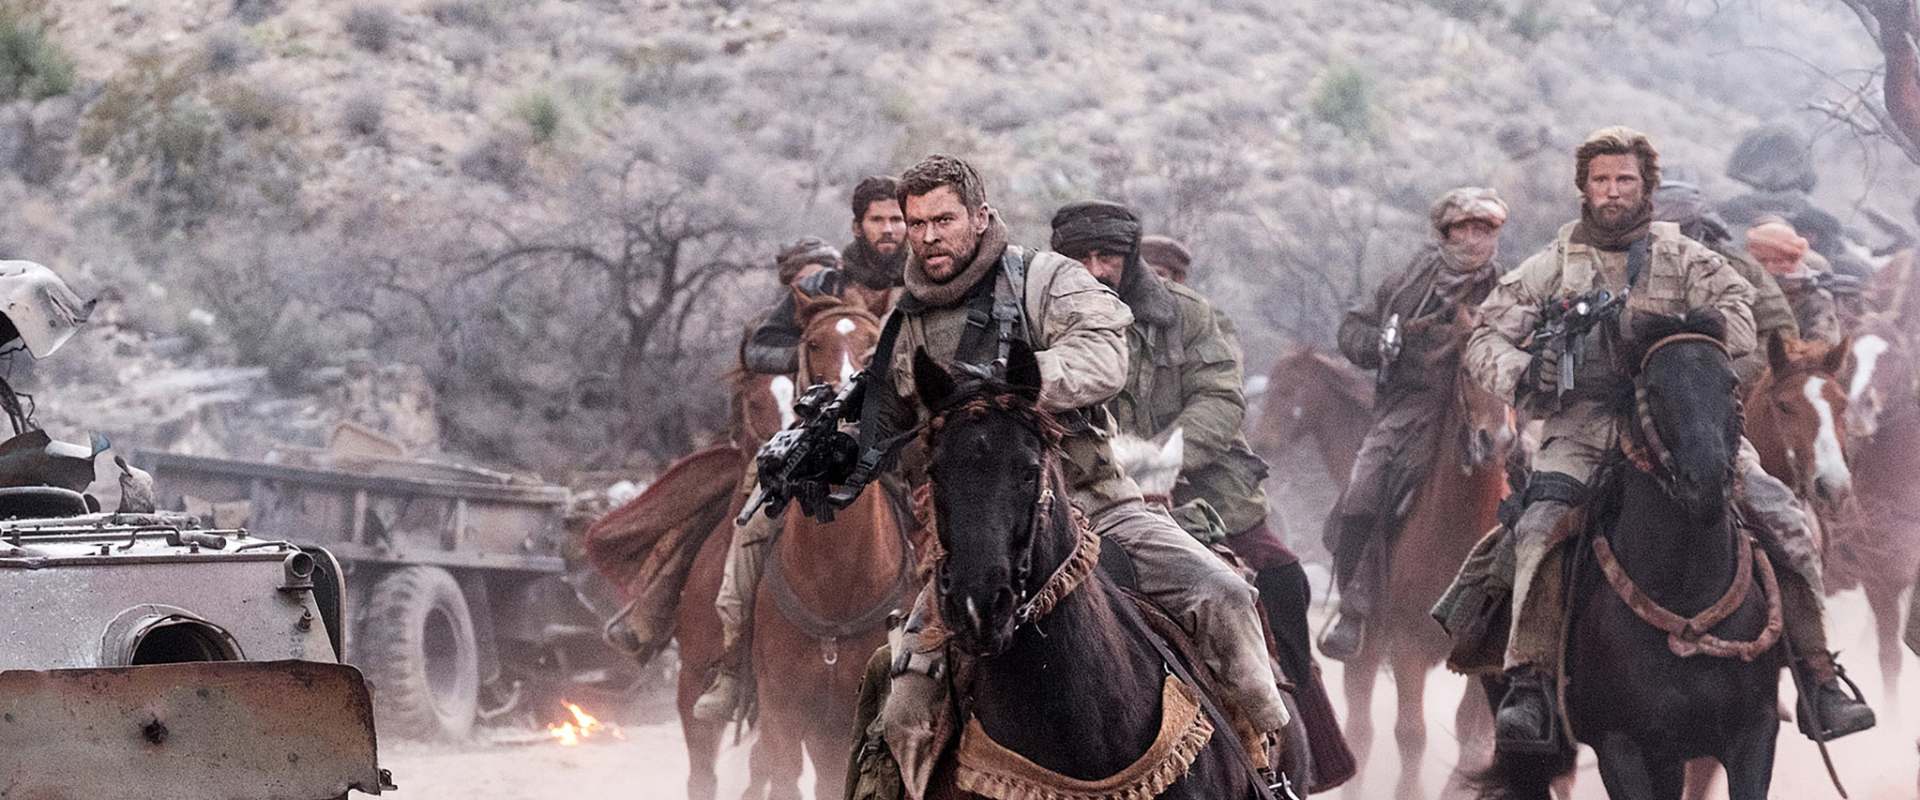 12 Strong background 2